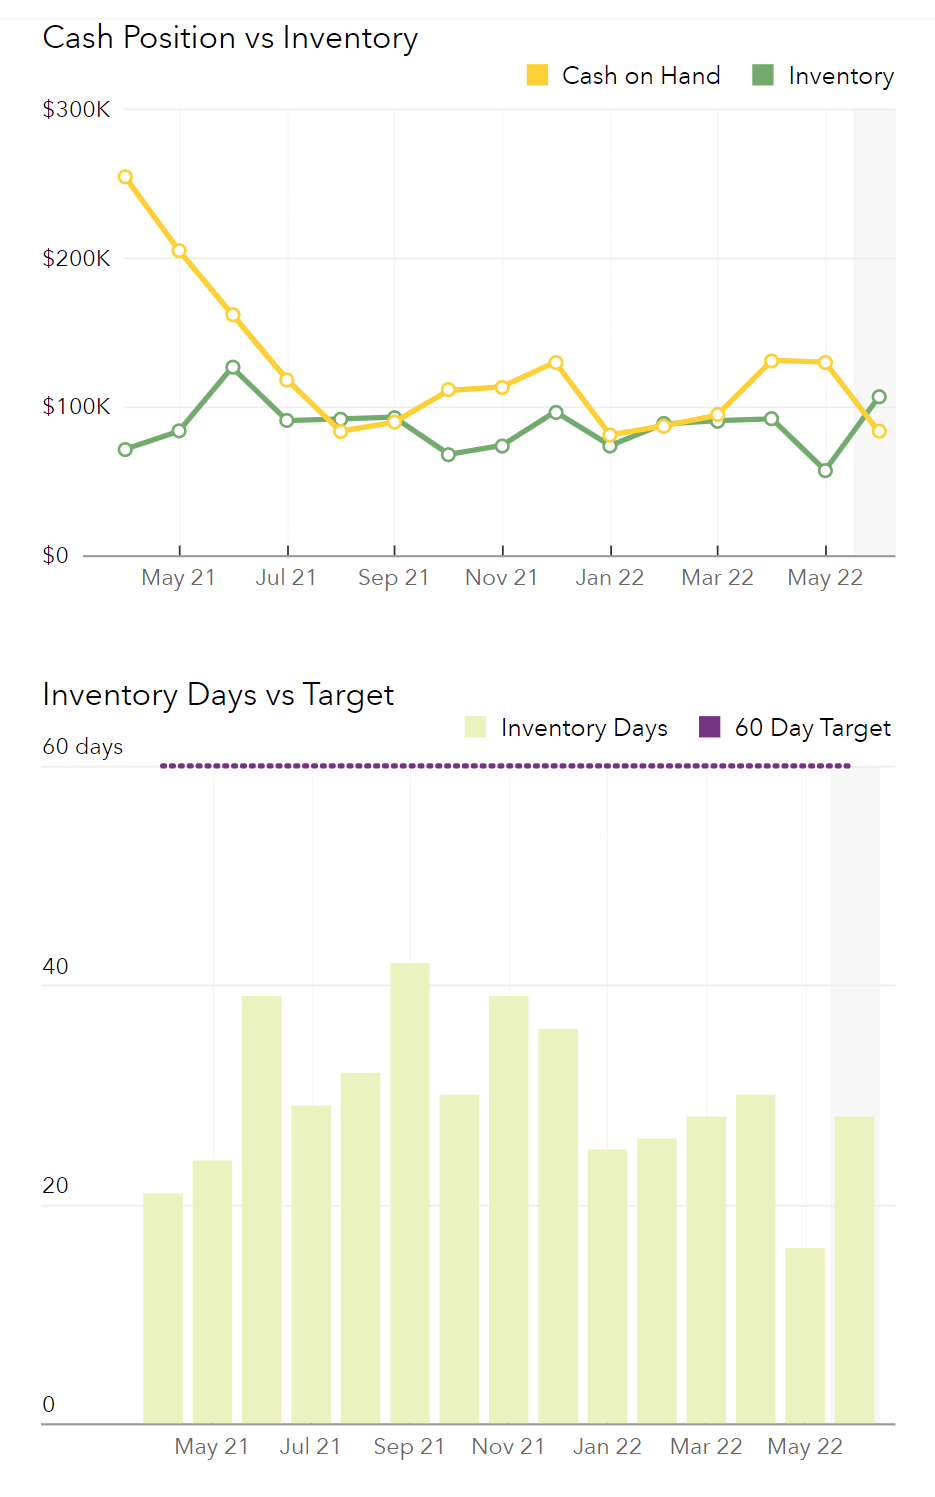 Graphs showing cash position vs inventory and inventory days vs target